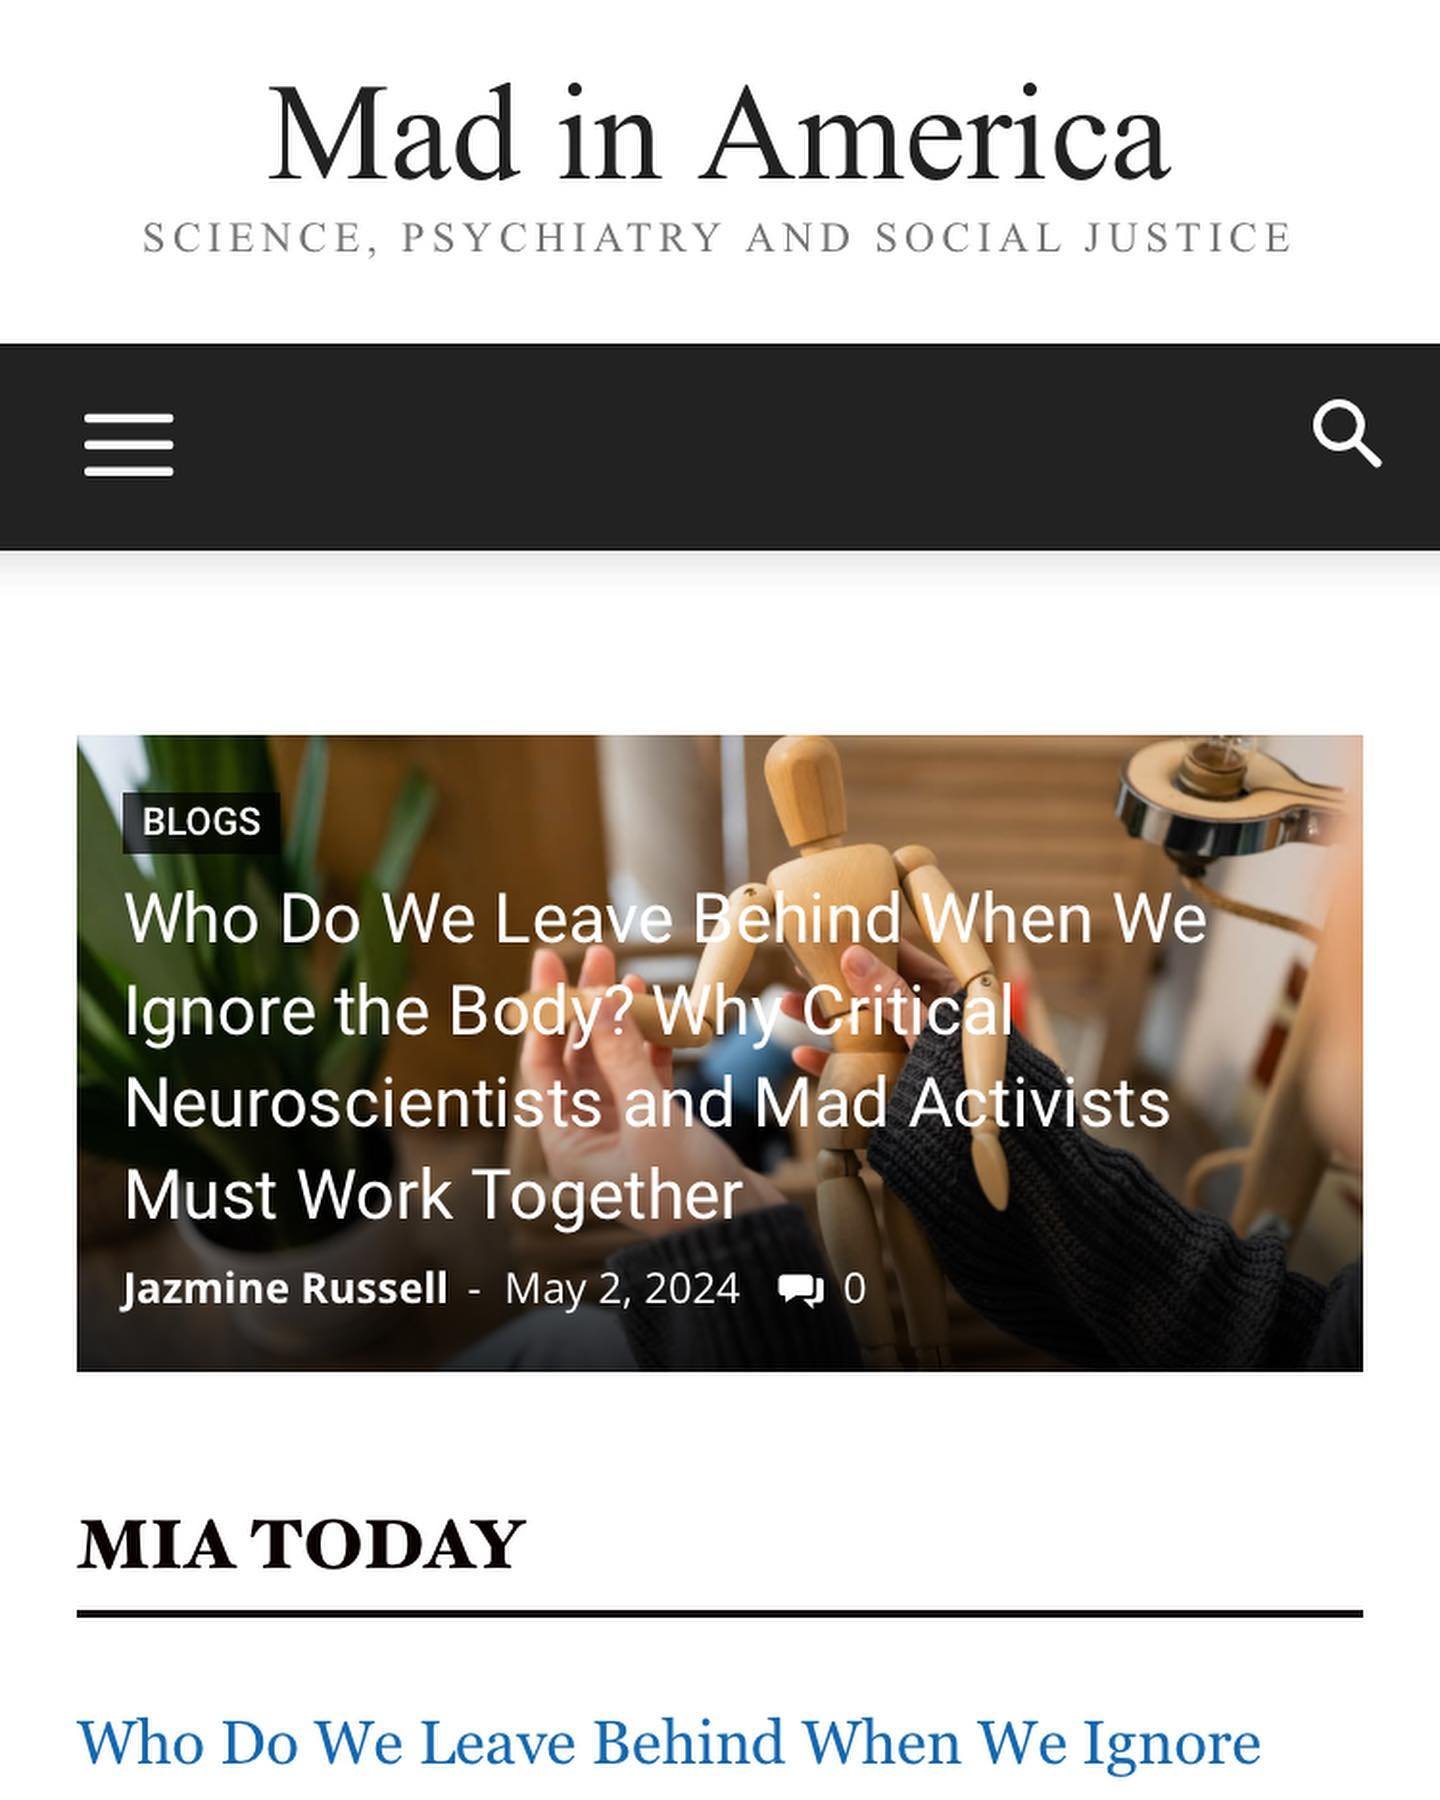 I wrote a blog for @madinamerica on why critical neuroscientists and mad activists need to work together. Especially when it comes to supporting the millions of people at the intersection of mental health and chronic illness. There are many ways in w